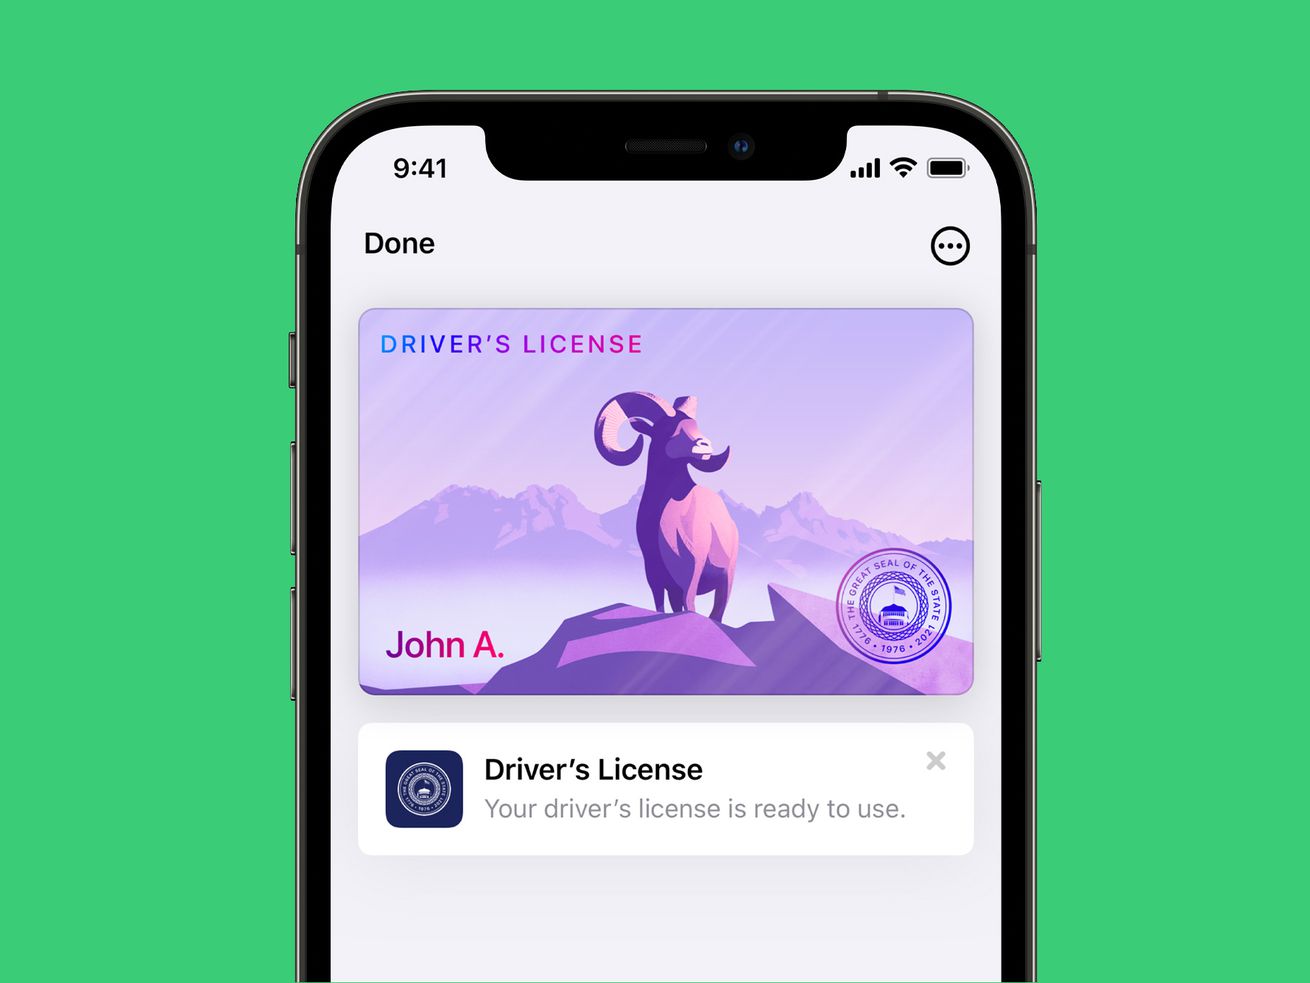 The new digital driver’s licenses from Apple sound slightly creepy